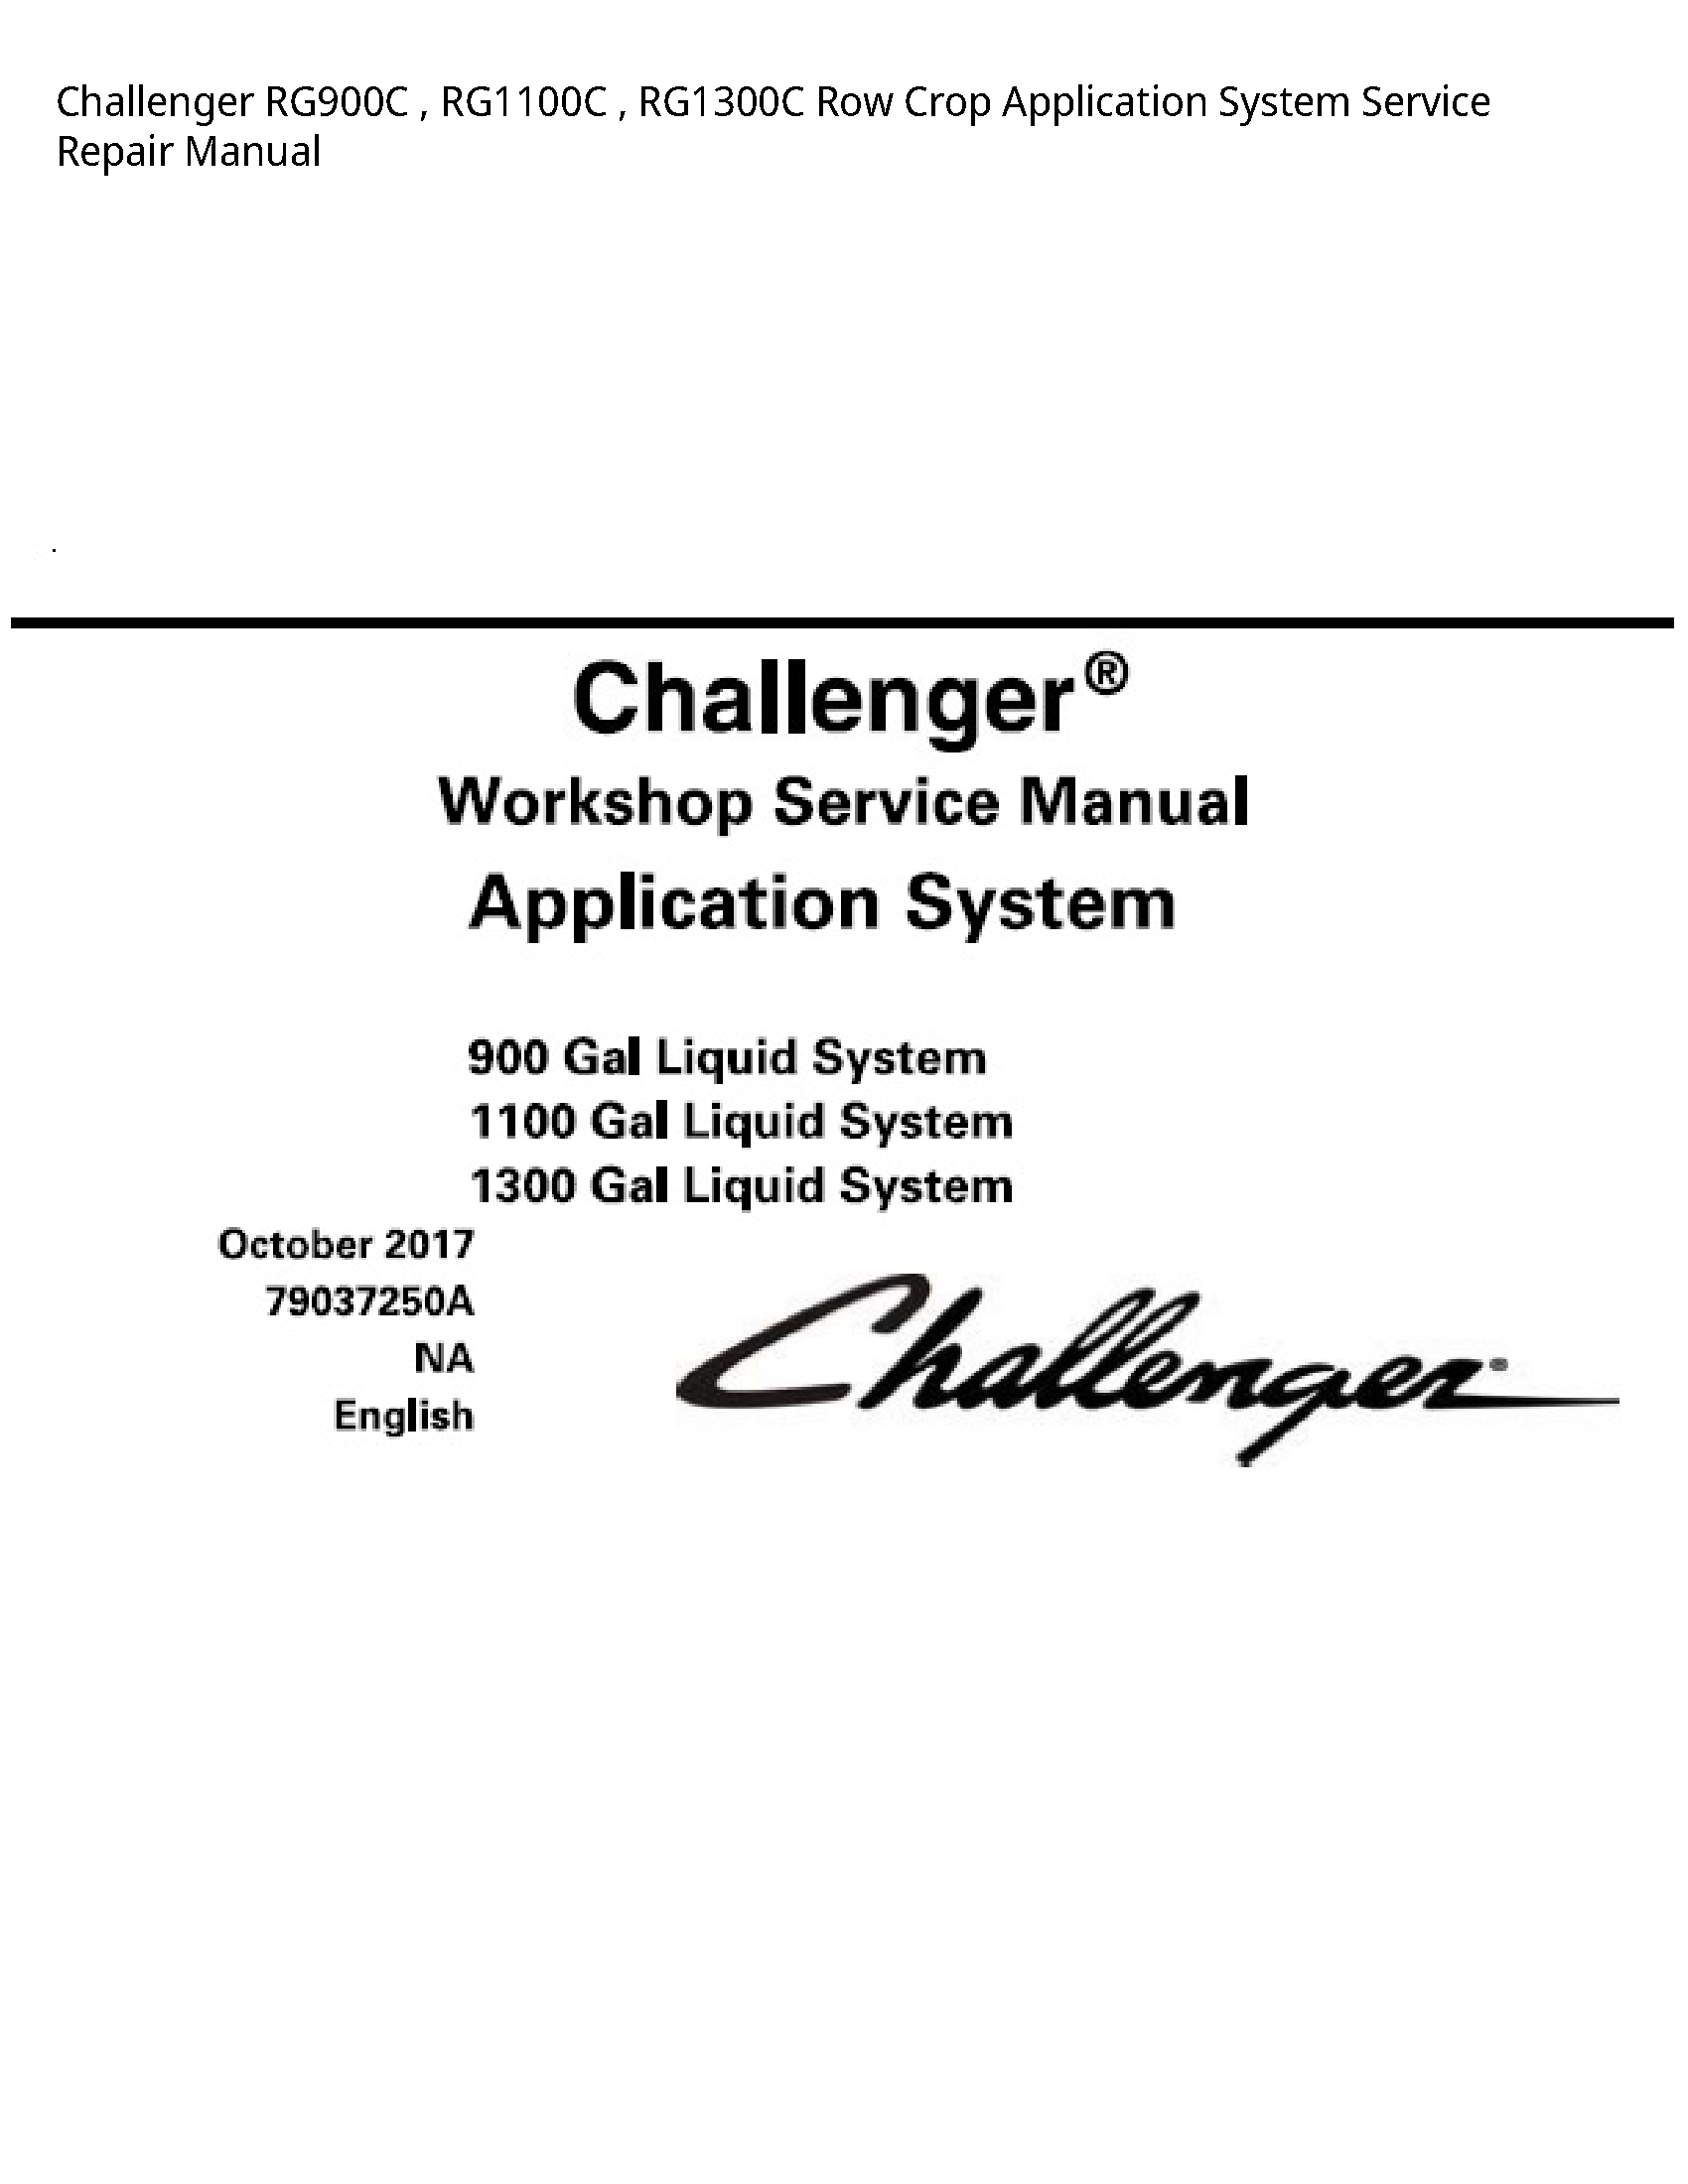 Challenger RG900C Row Crop Application System manual